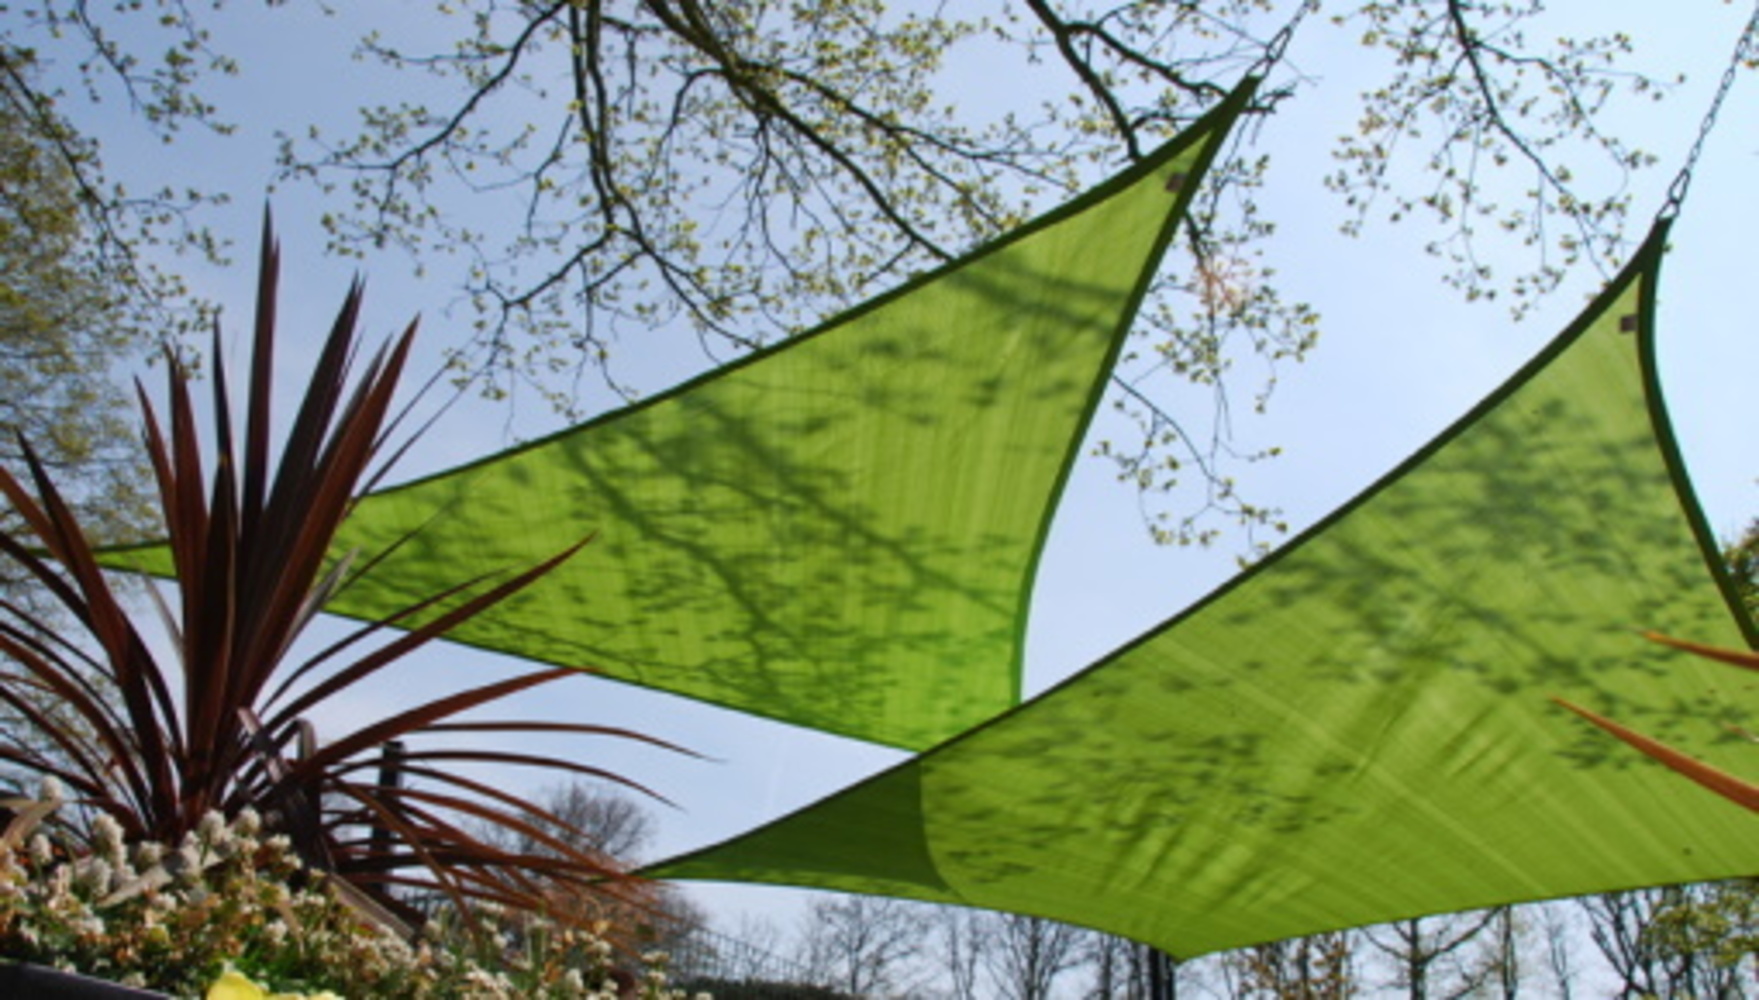  How to mount a nesling shade sail?